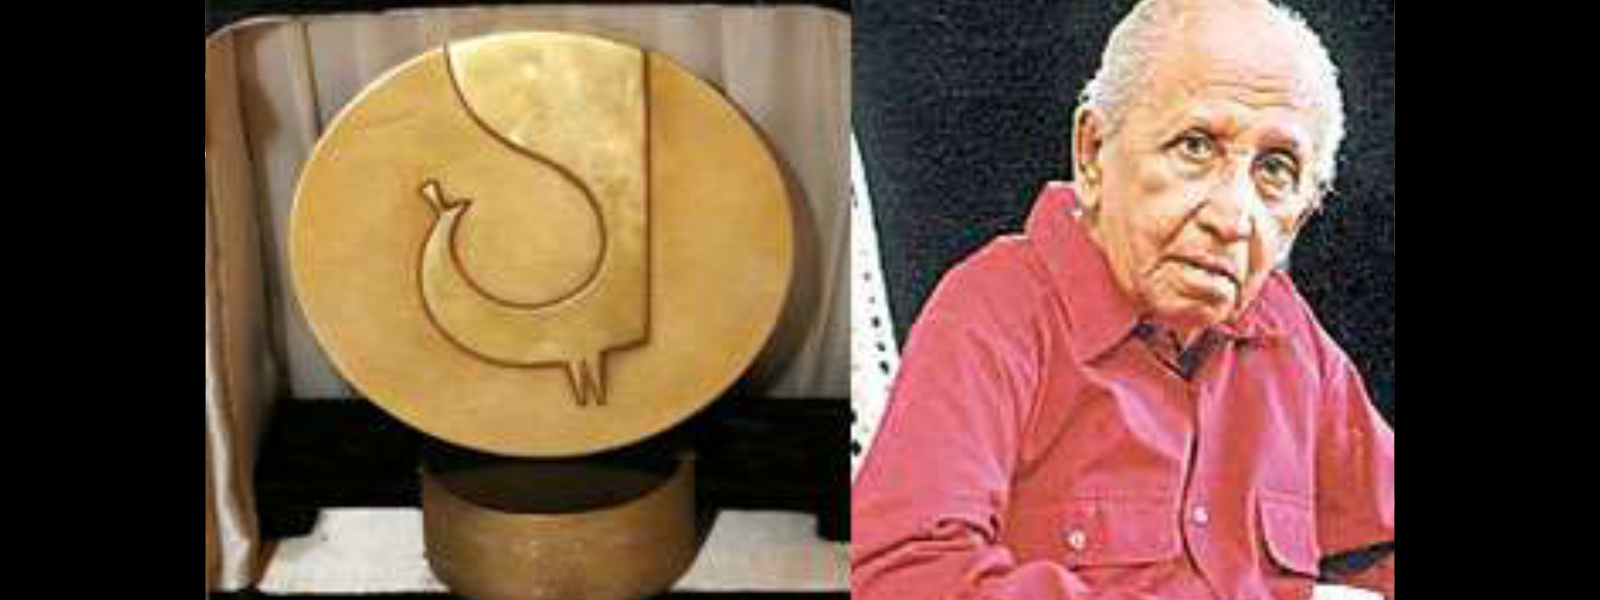 Two awards of Late Dr. Lester James Peries stolen